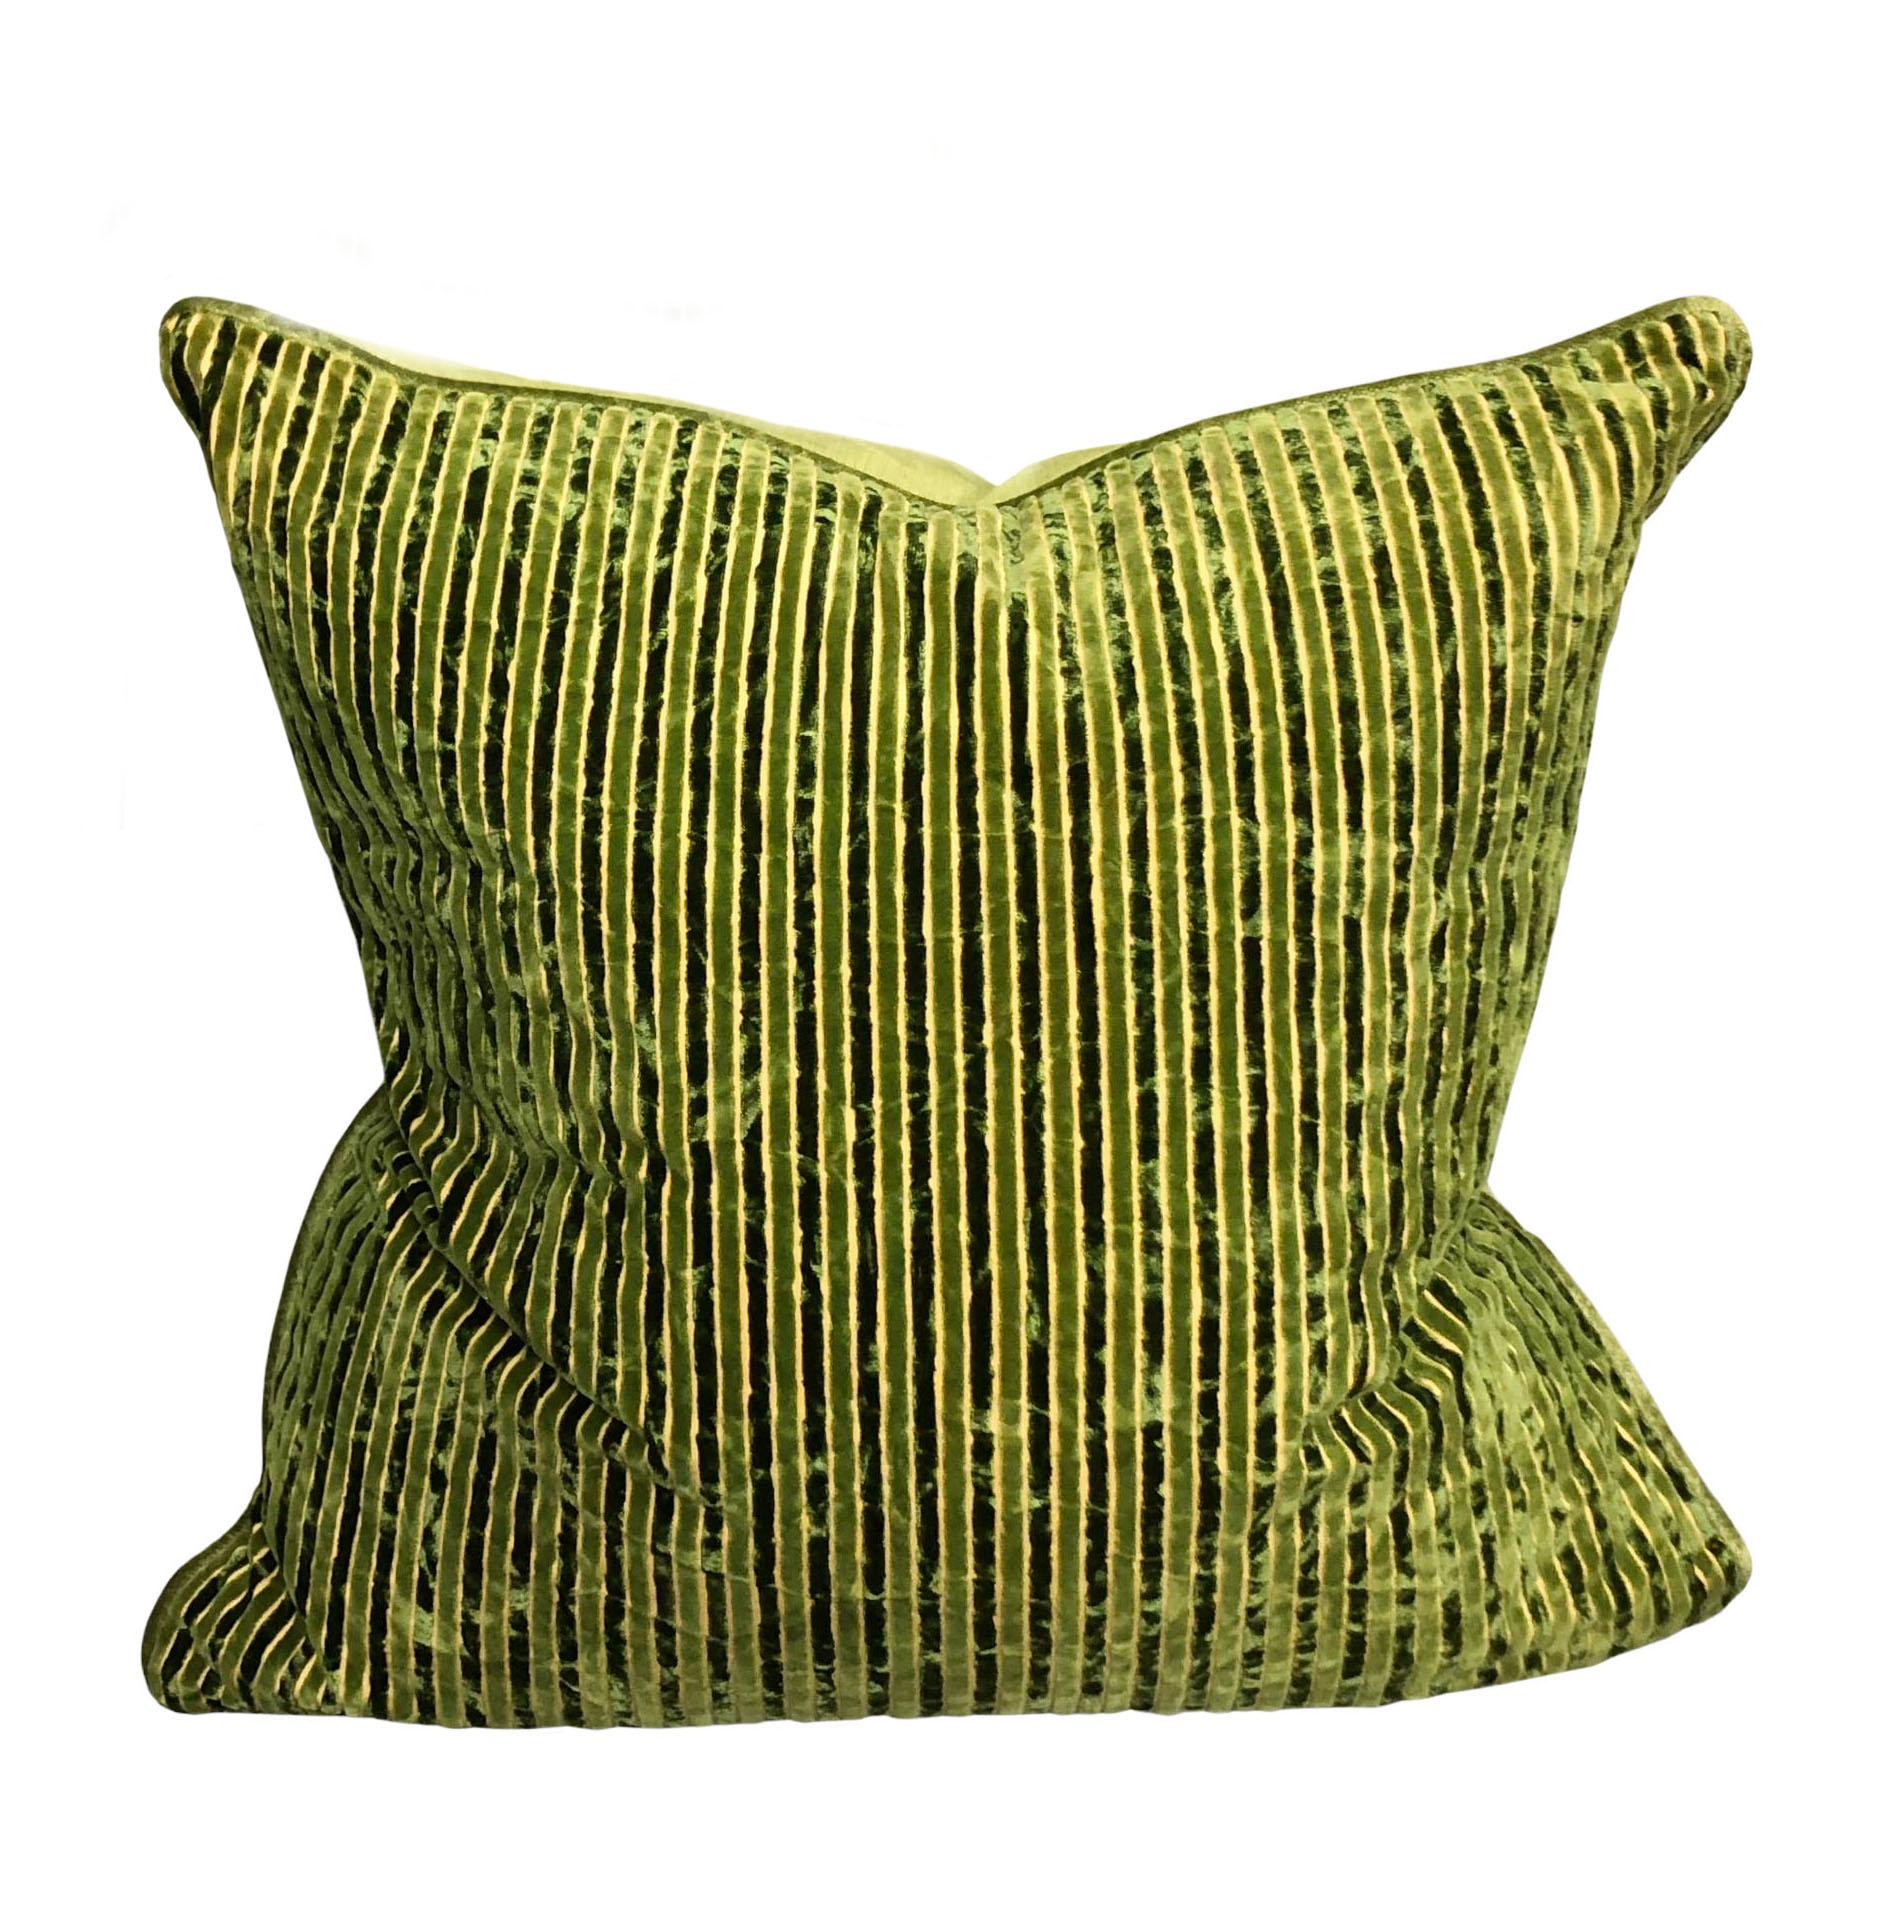 A pair of Salamandré silk velvet pillows with alternating green stripes on the front and solid green backs. Feather and down fillings. Pillows are newly made with vintage 1970s fabric.
 